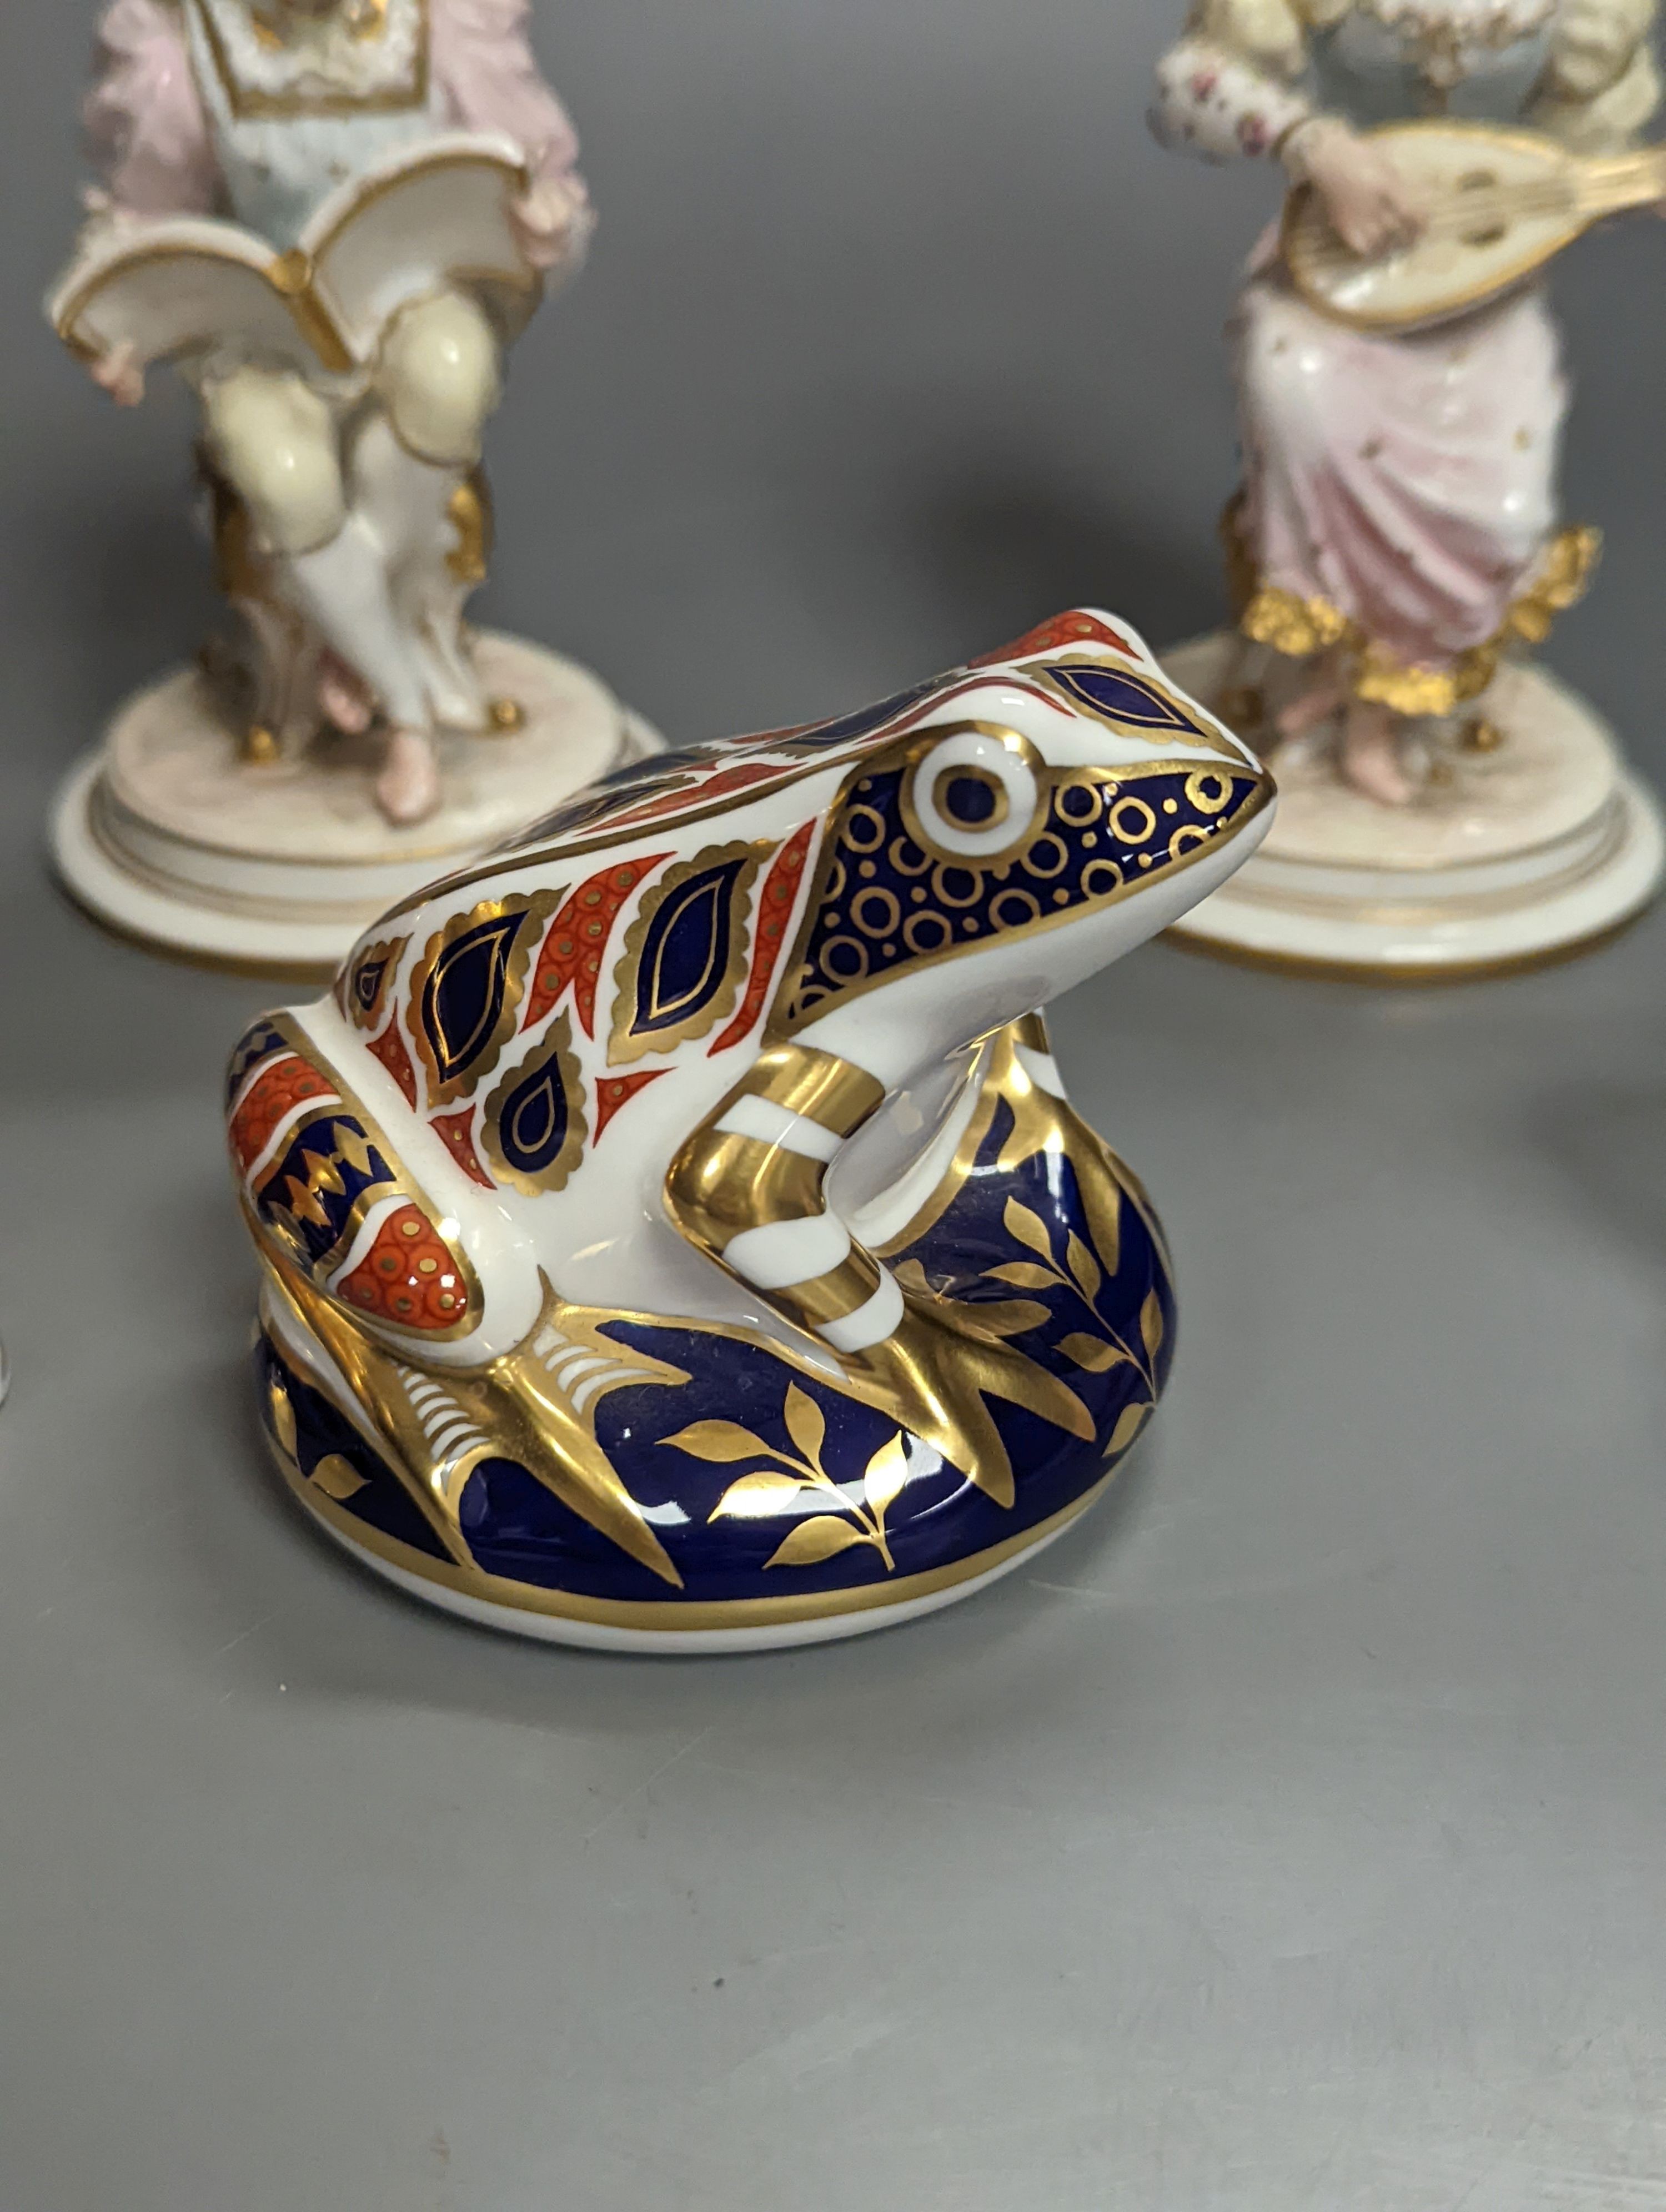 A pair of Royal Crown Derby figures of musicians, c.1905, 15cm, two similar animal paperweights and a Latticino glass slipper, tallest being the dragon 11cm